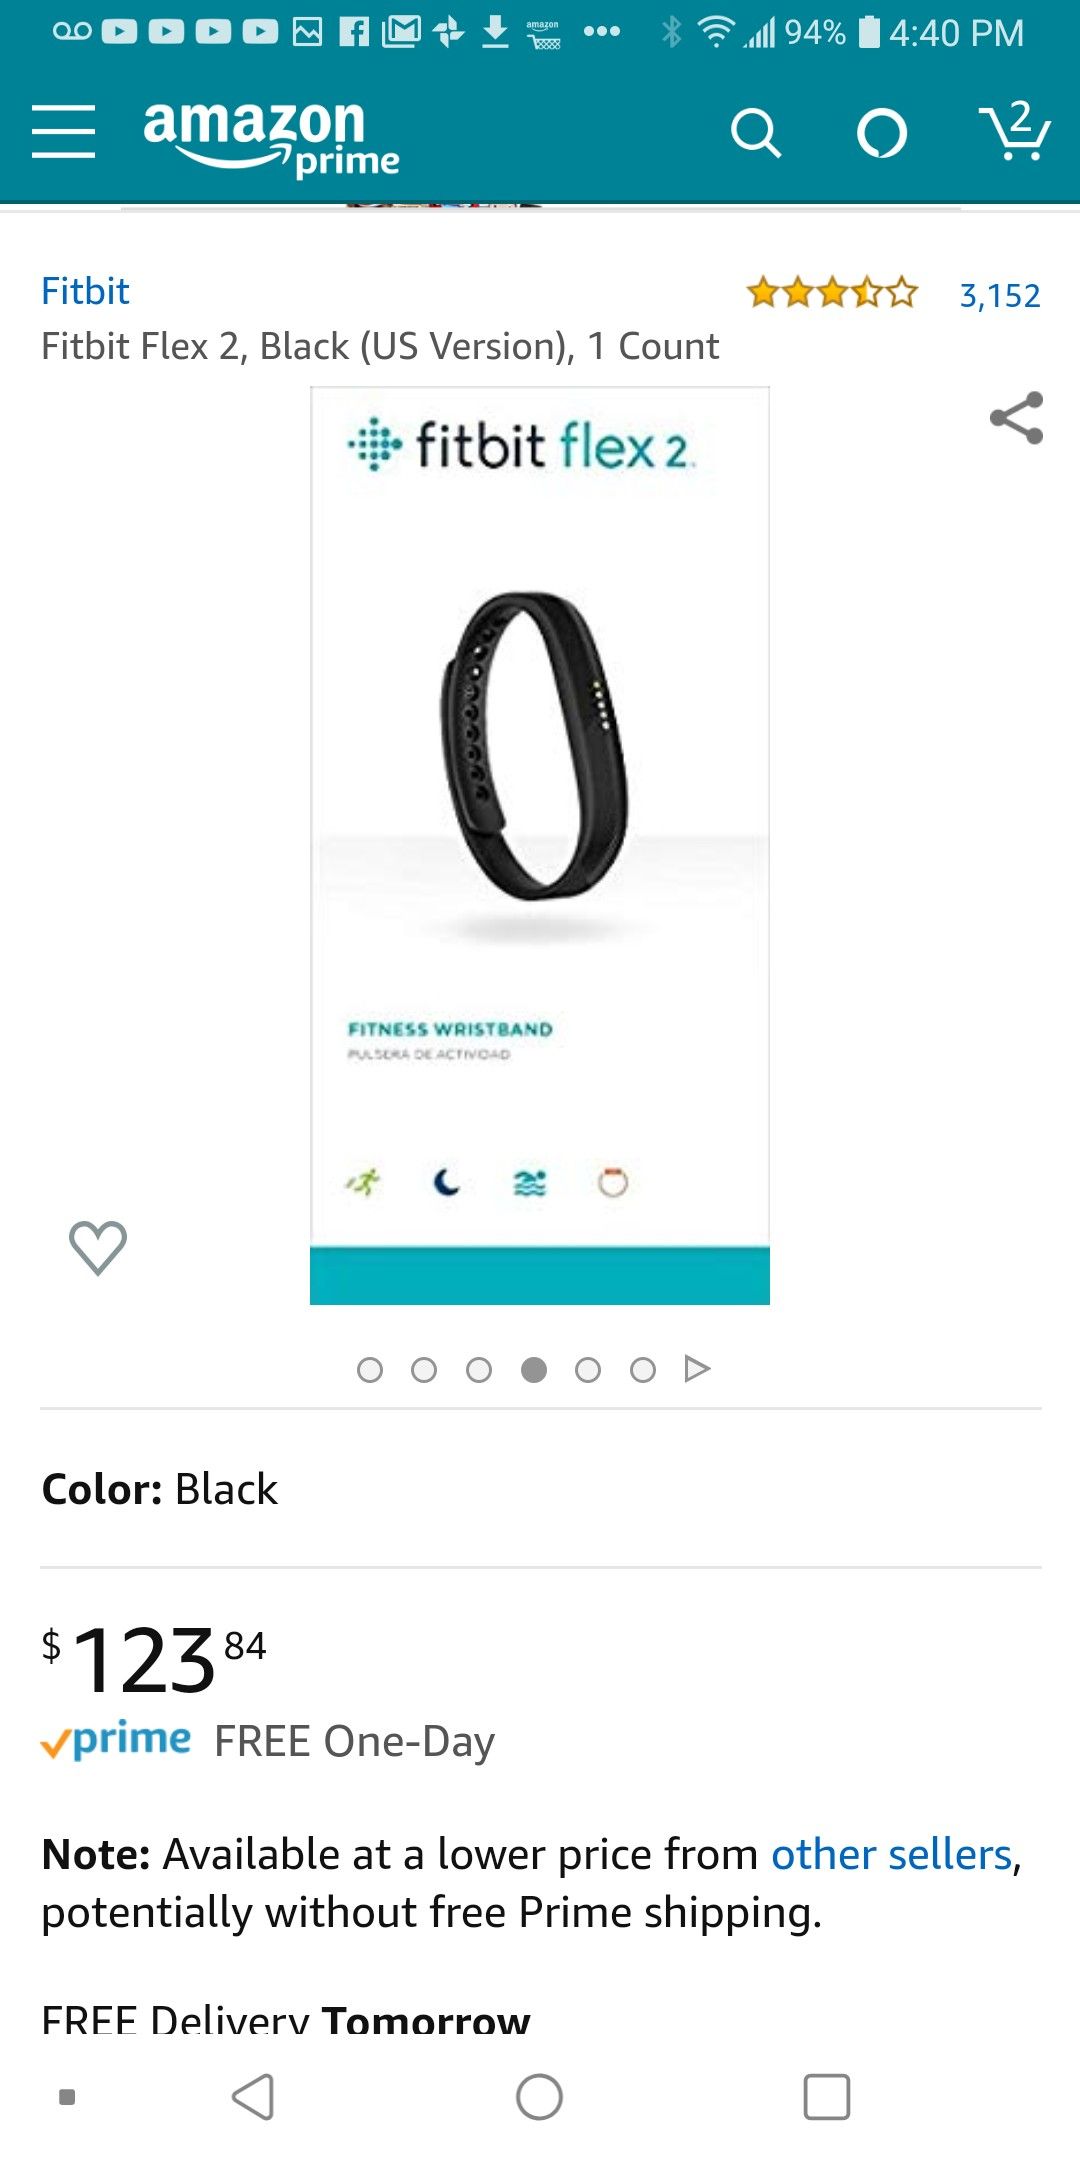 Fitbit Flex 2 and 2 charger